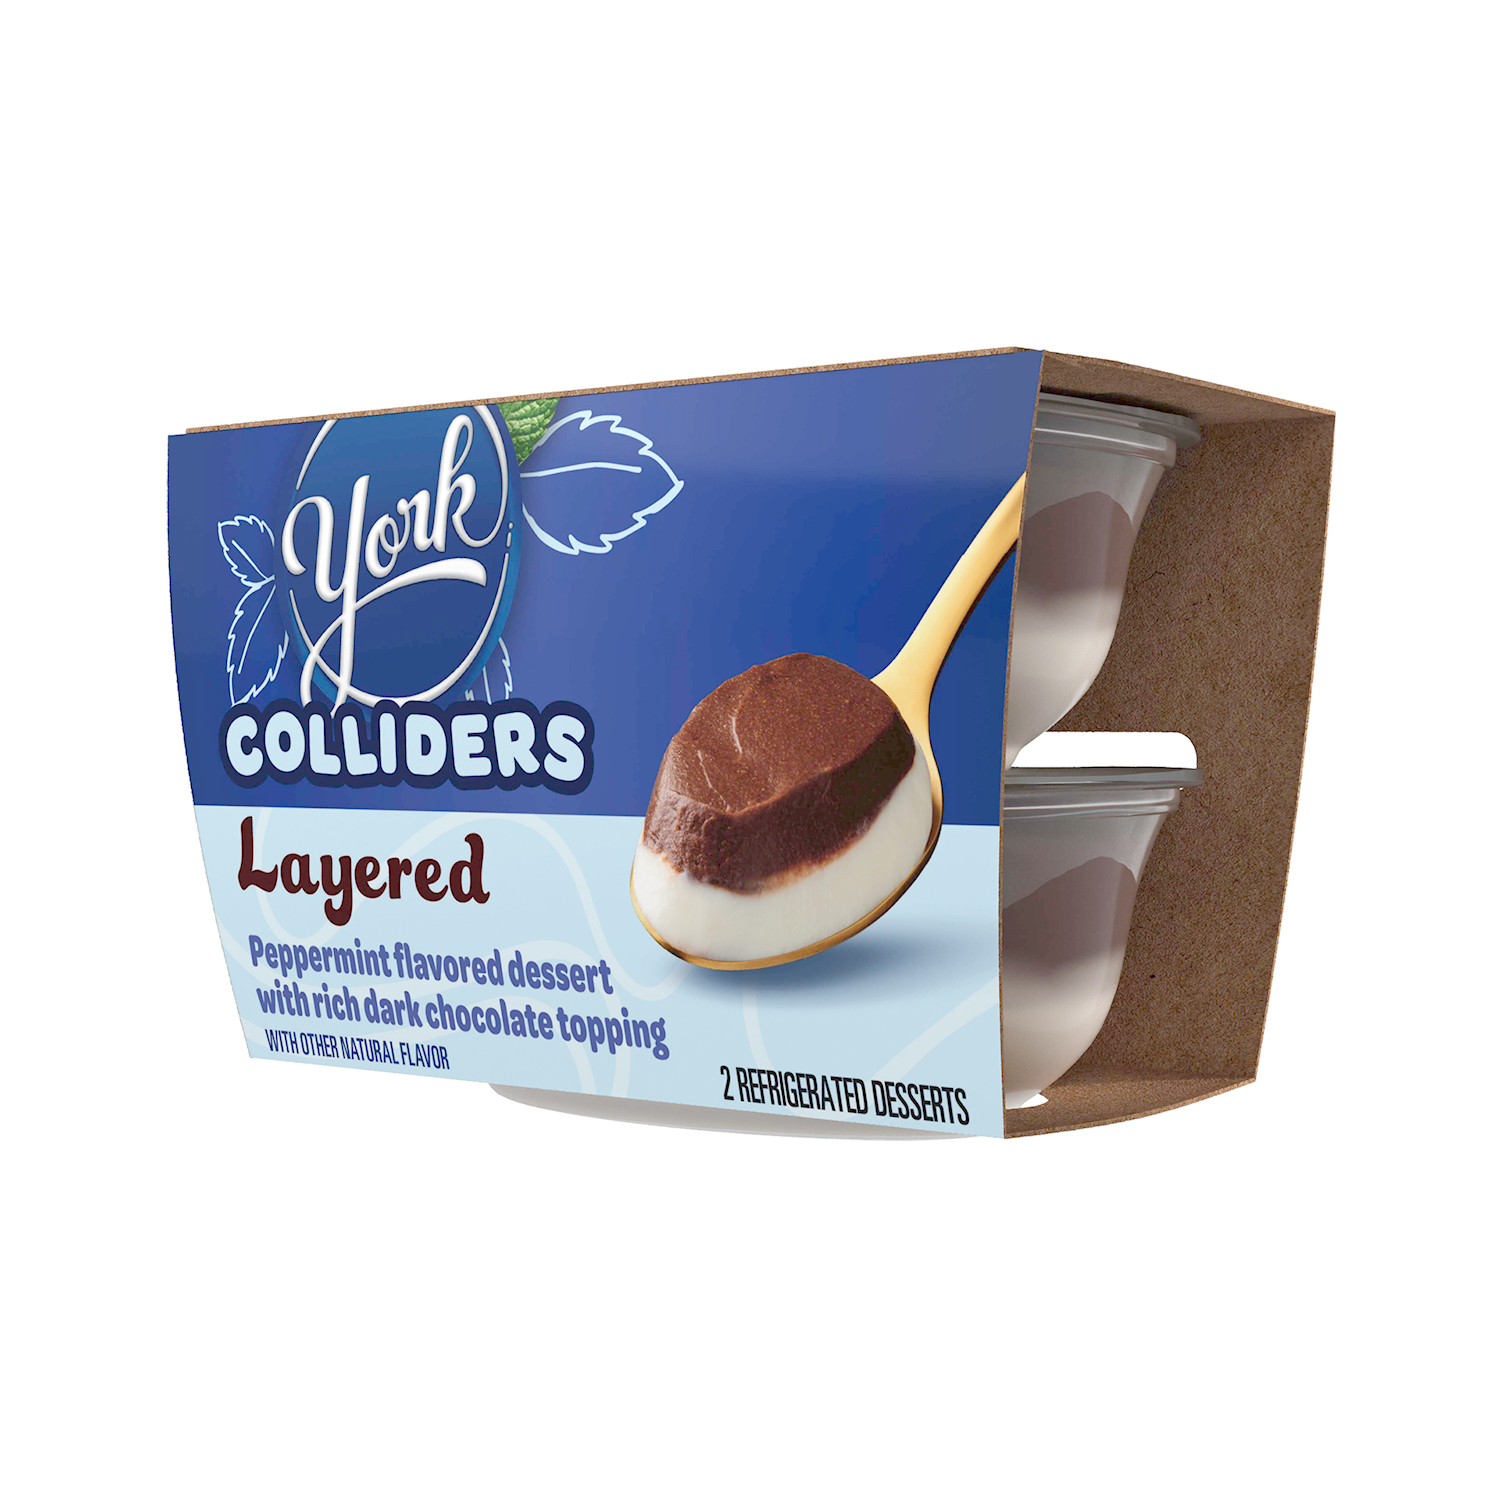 YORK COLLIDERS™ Layered Dessert, 7 oz, 2 pack - Right of Package